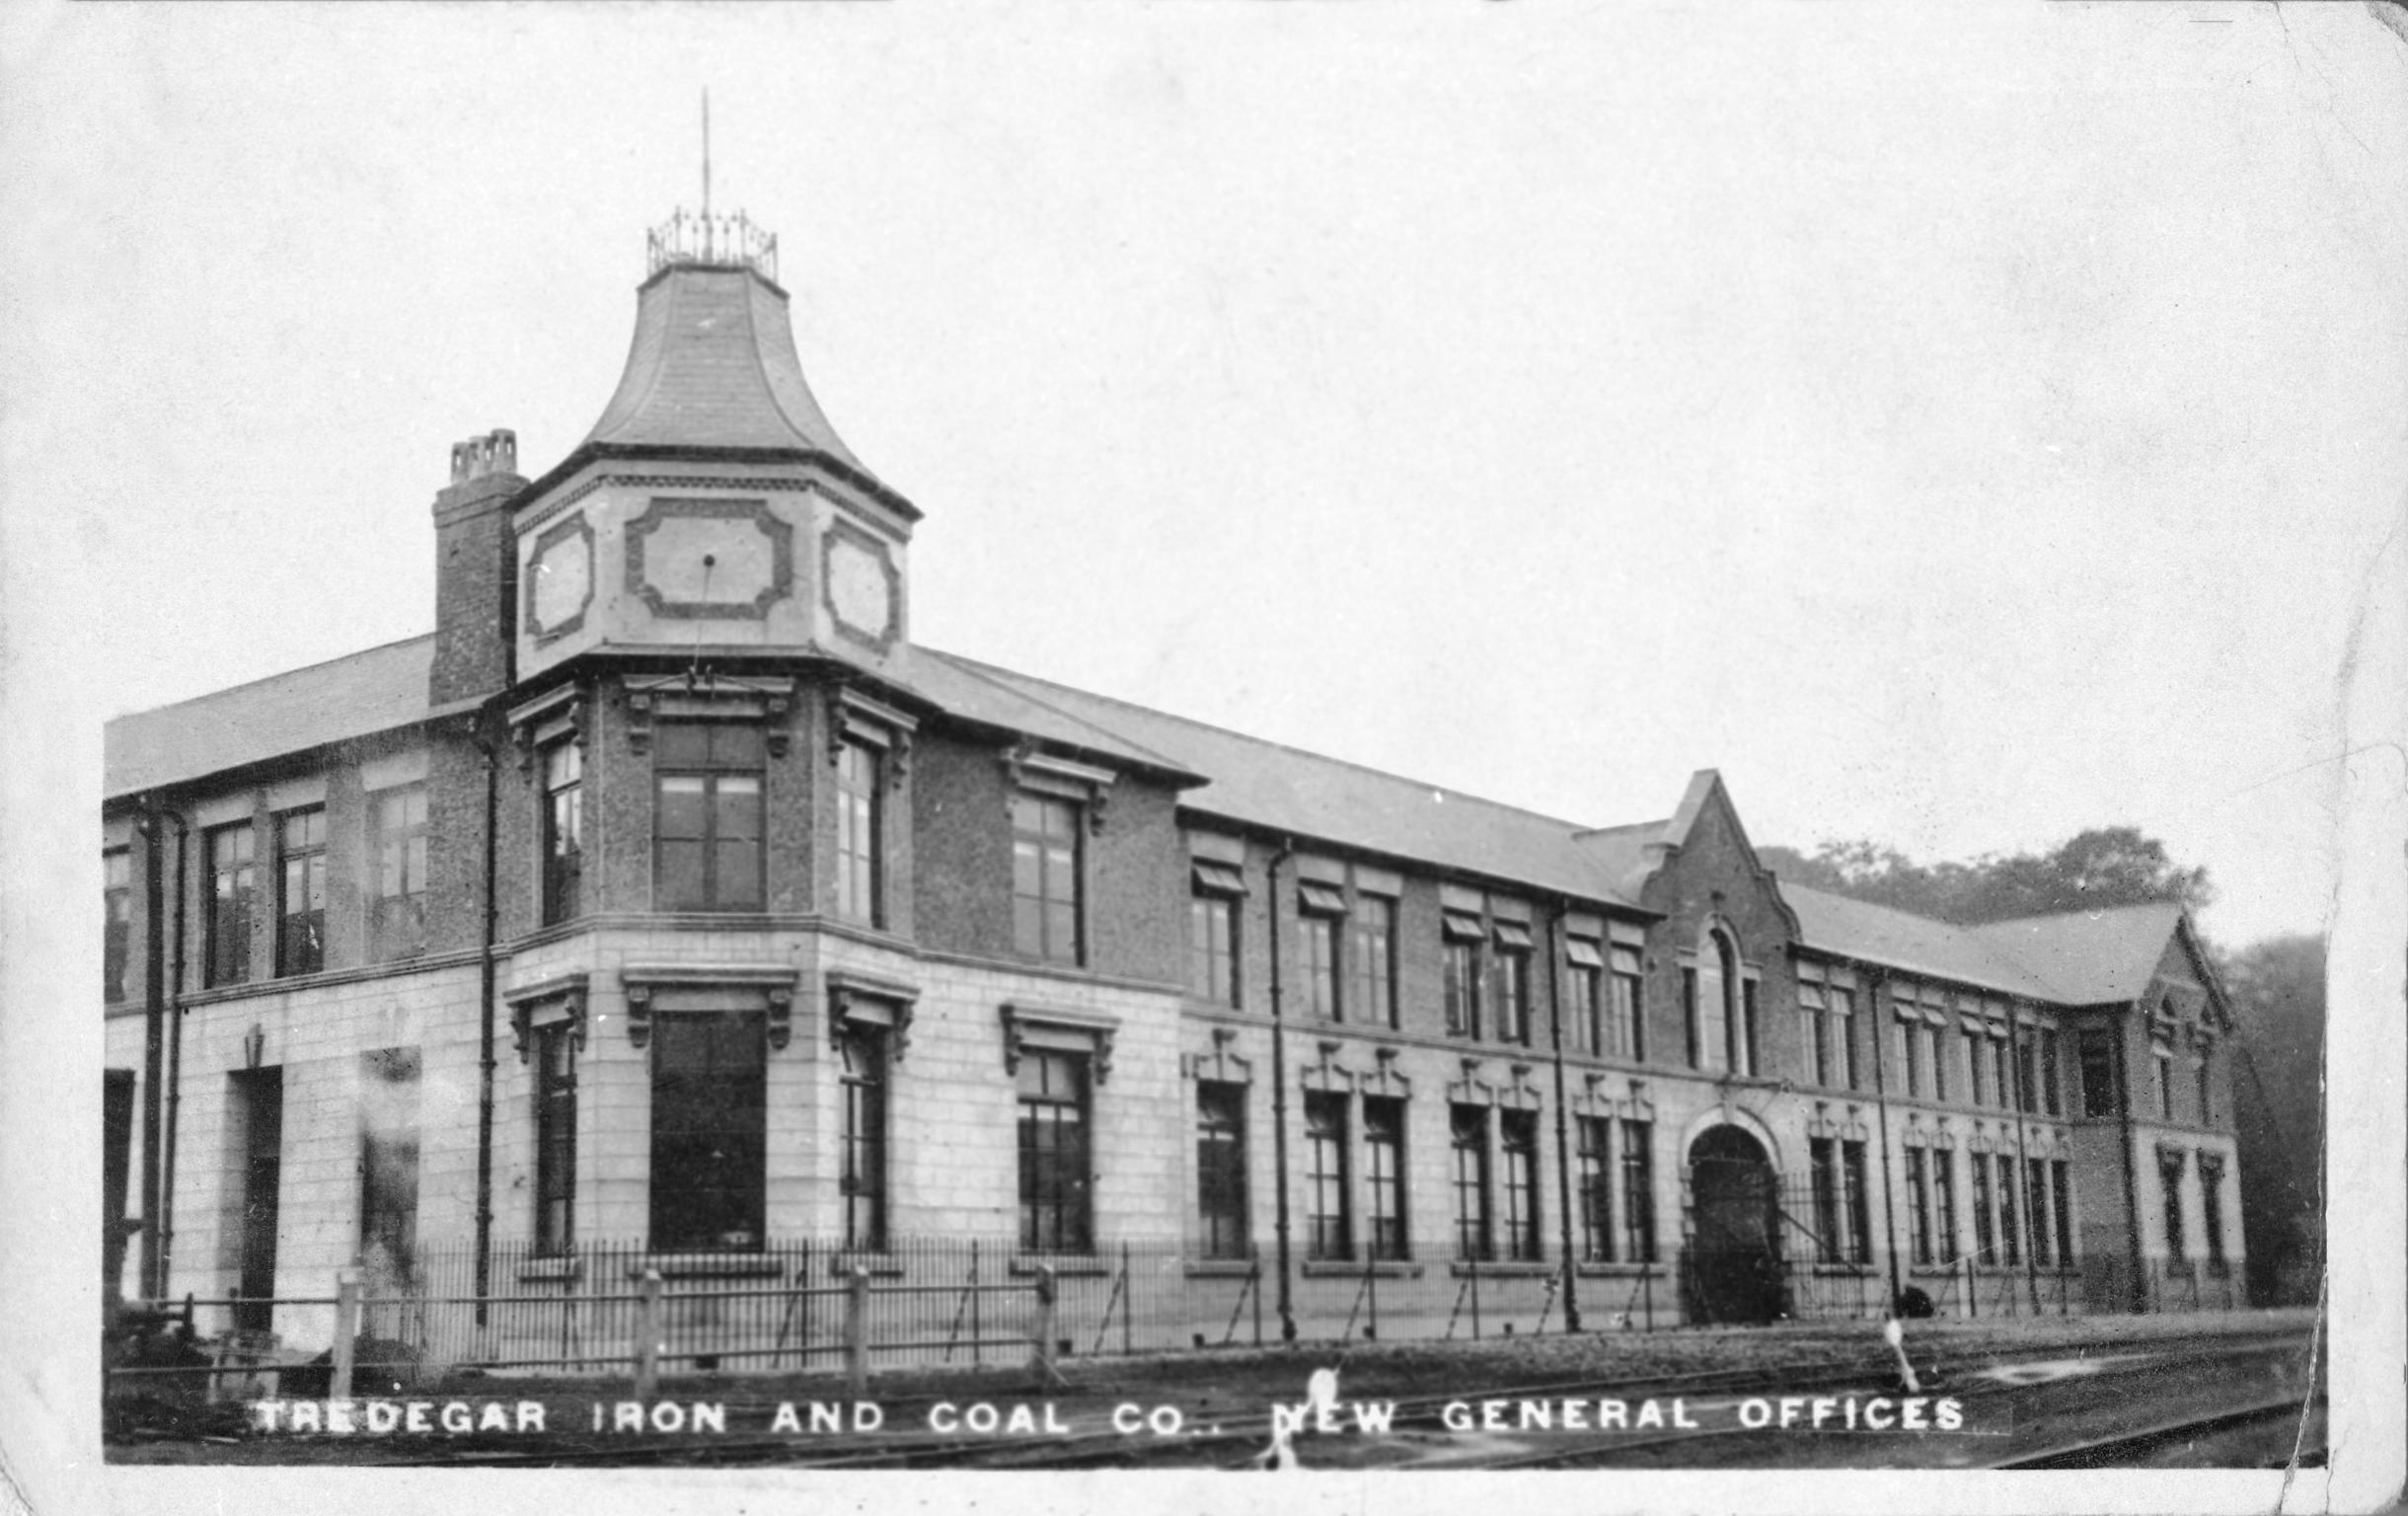 Tredegar Iron and Coal Co. New General Offices (postcard)